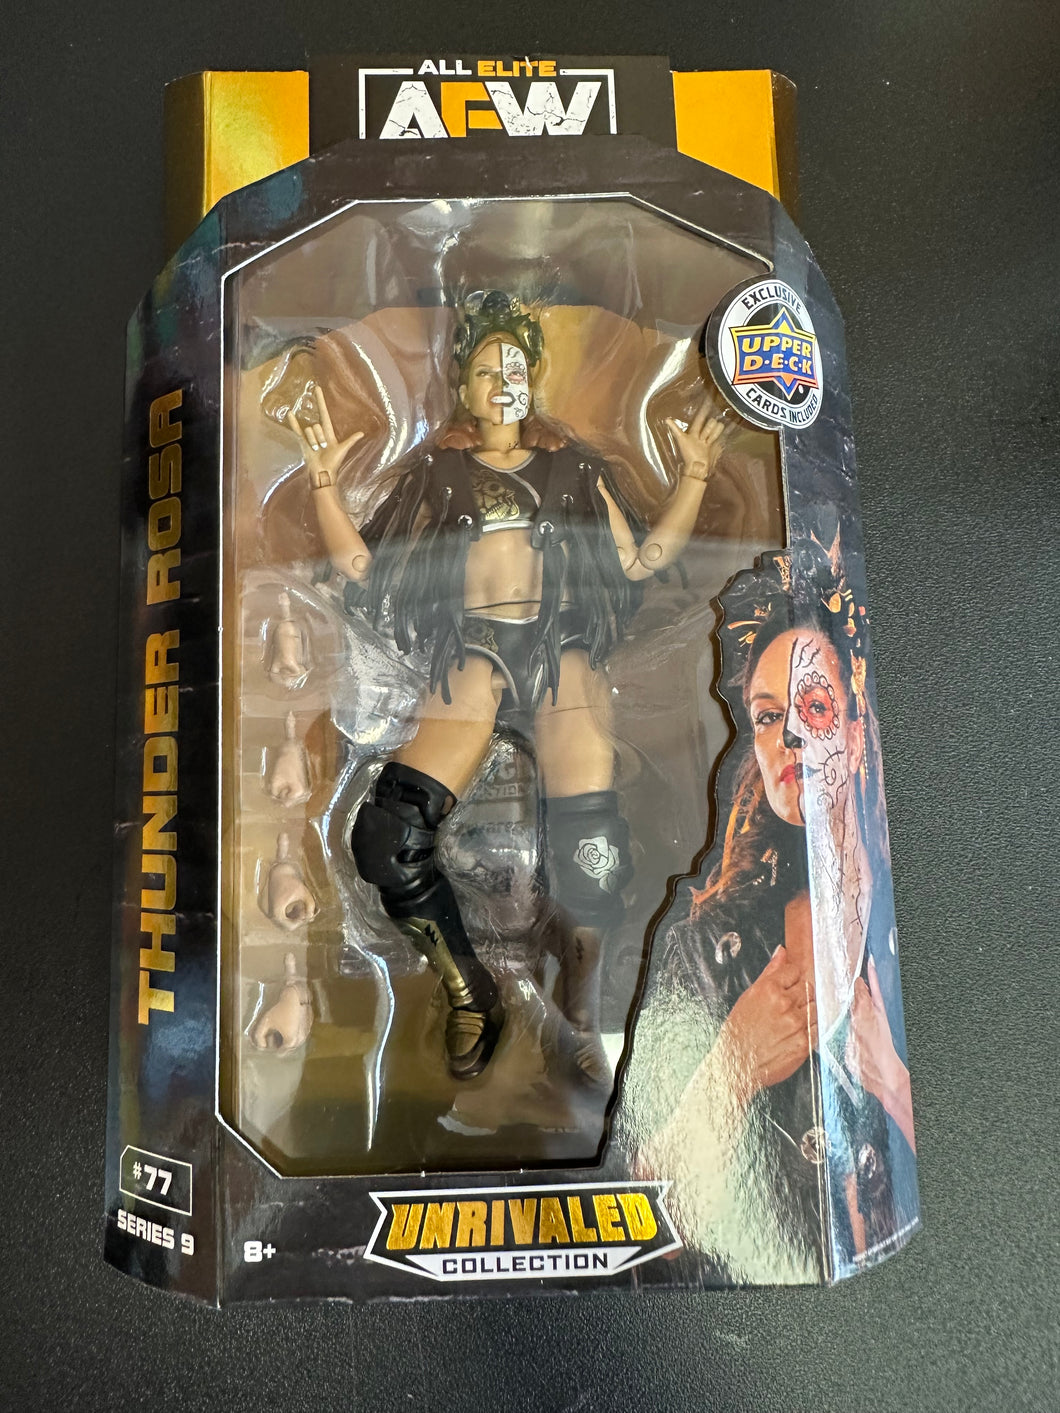 AEW UNRIVALED COLLECTION THUNDER ROSA #77 SERIES 9